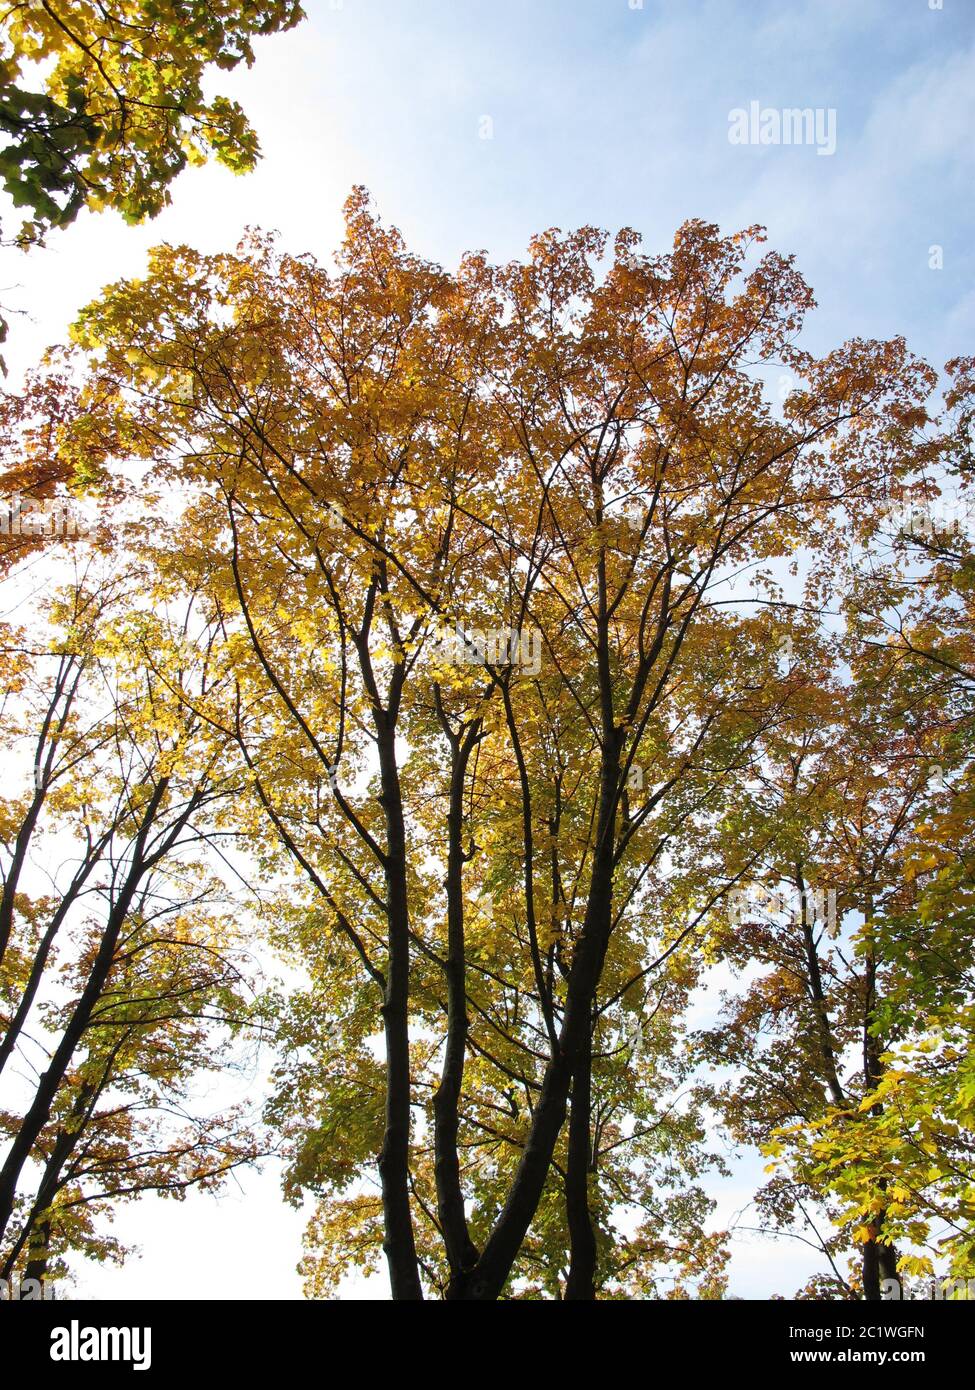 Deciduous trees with typical leaf coloring in autumn Stock Photo